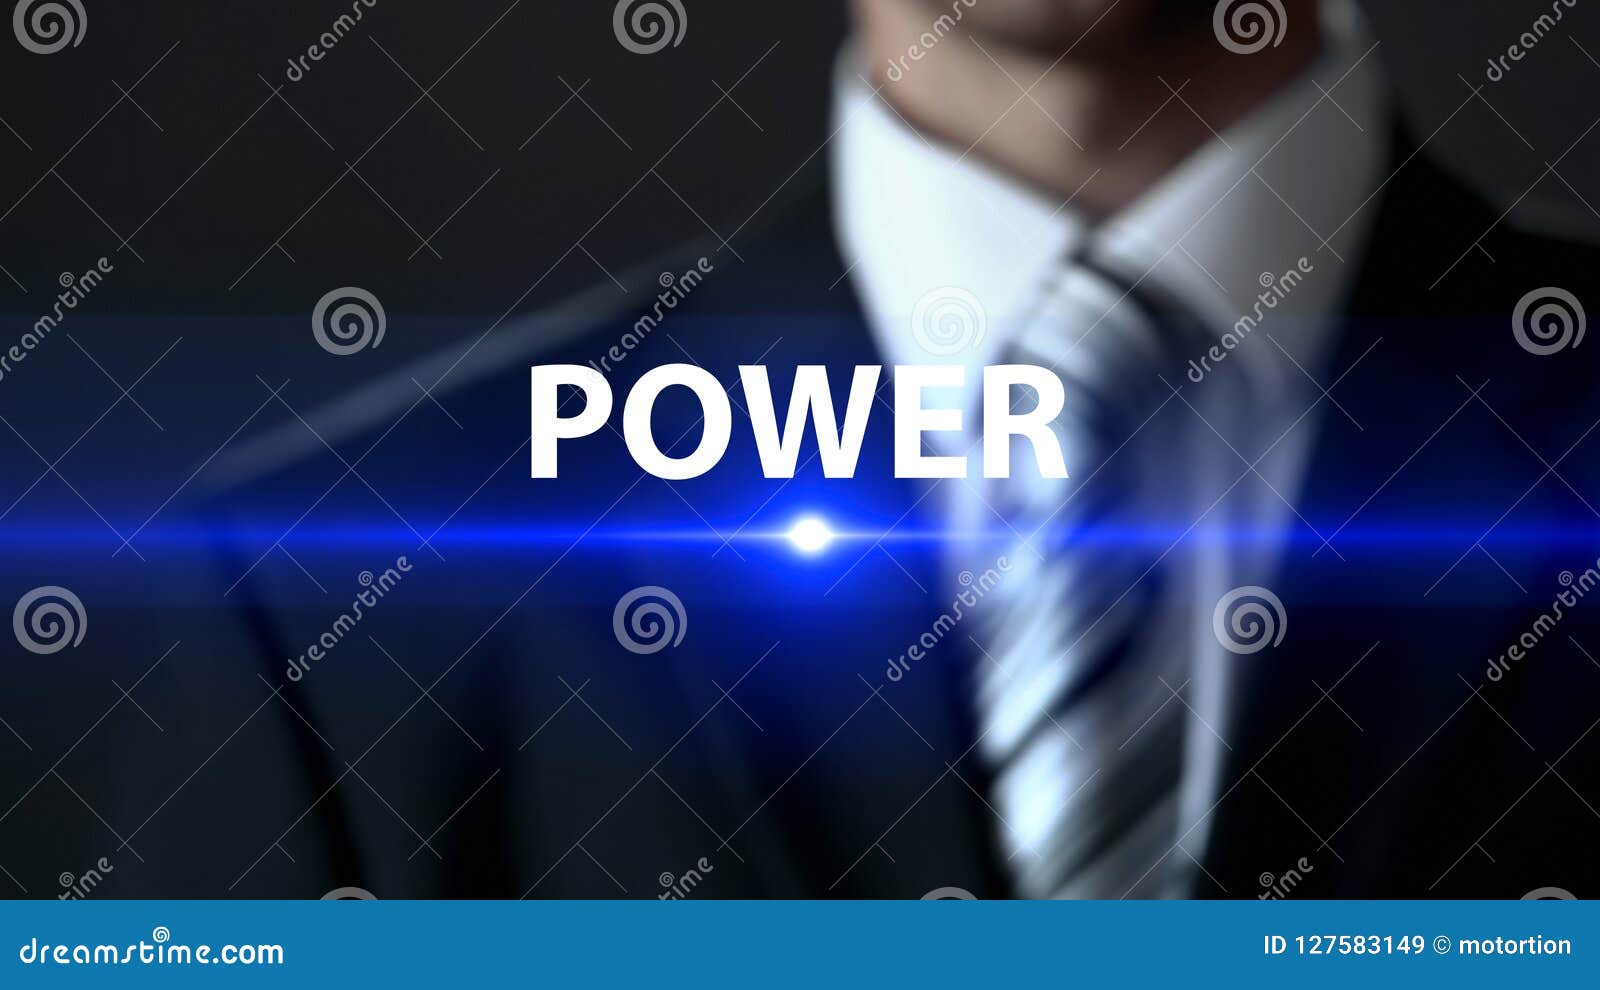 power, businessman in suit standing in front of screen, influence and strength